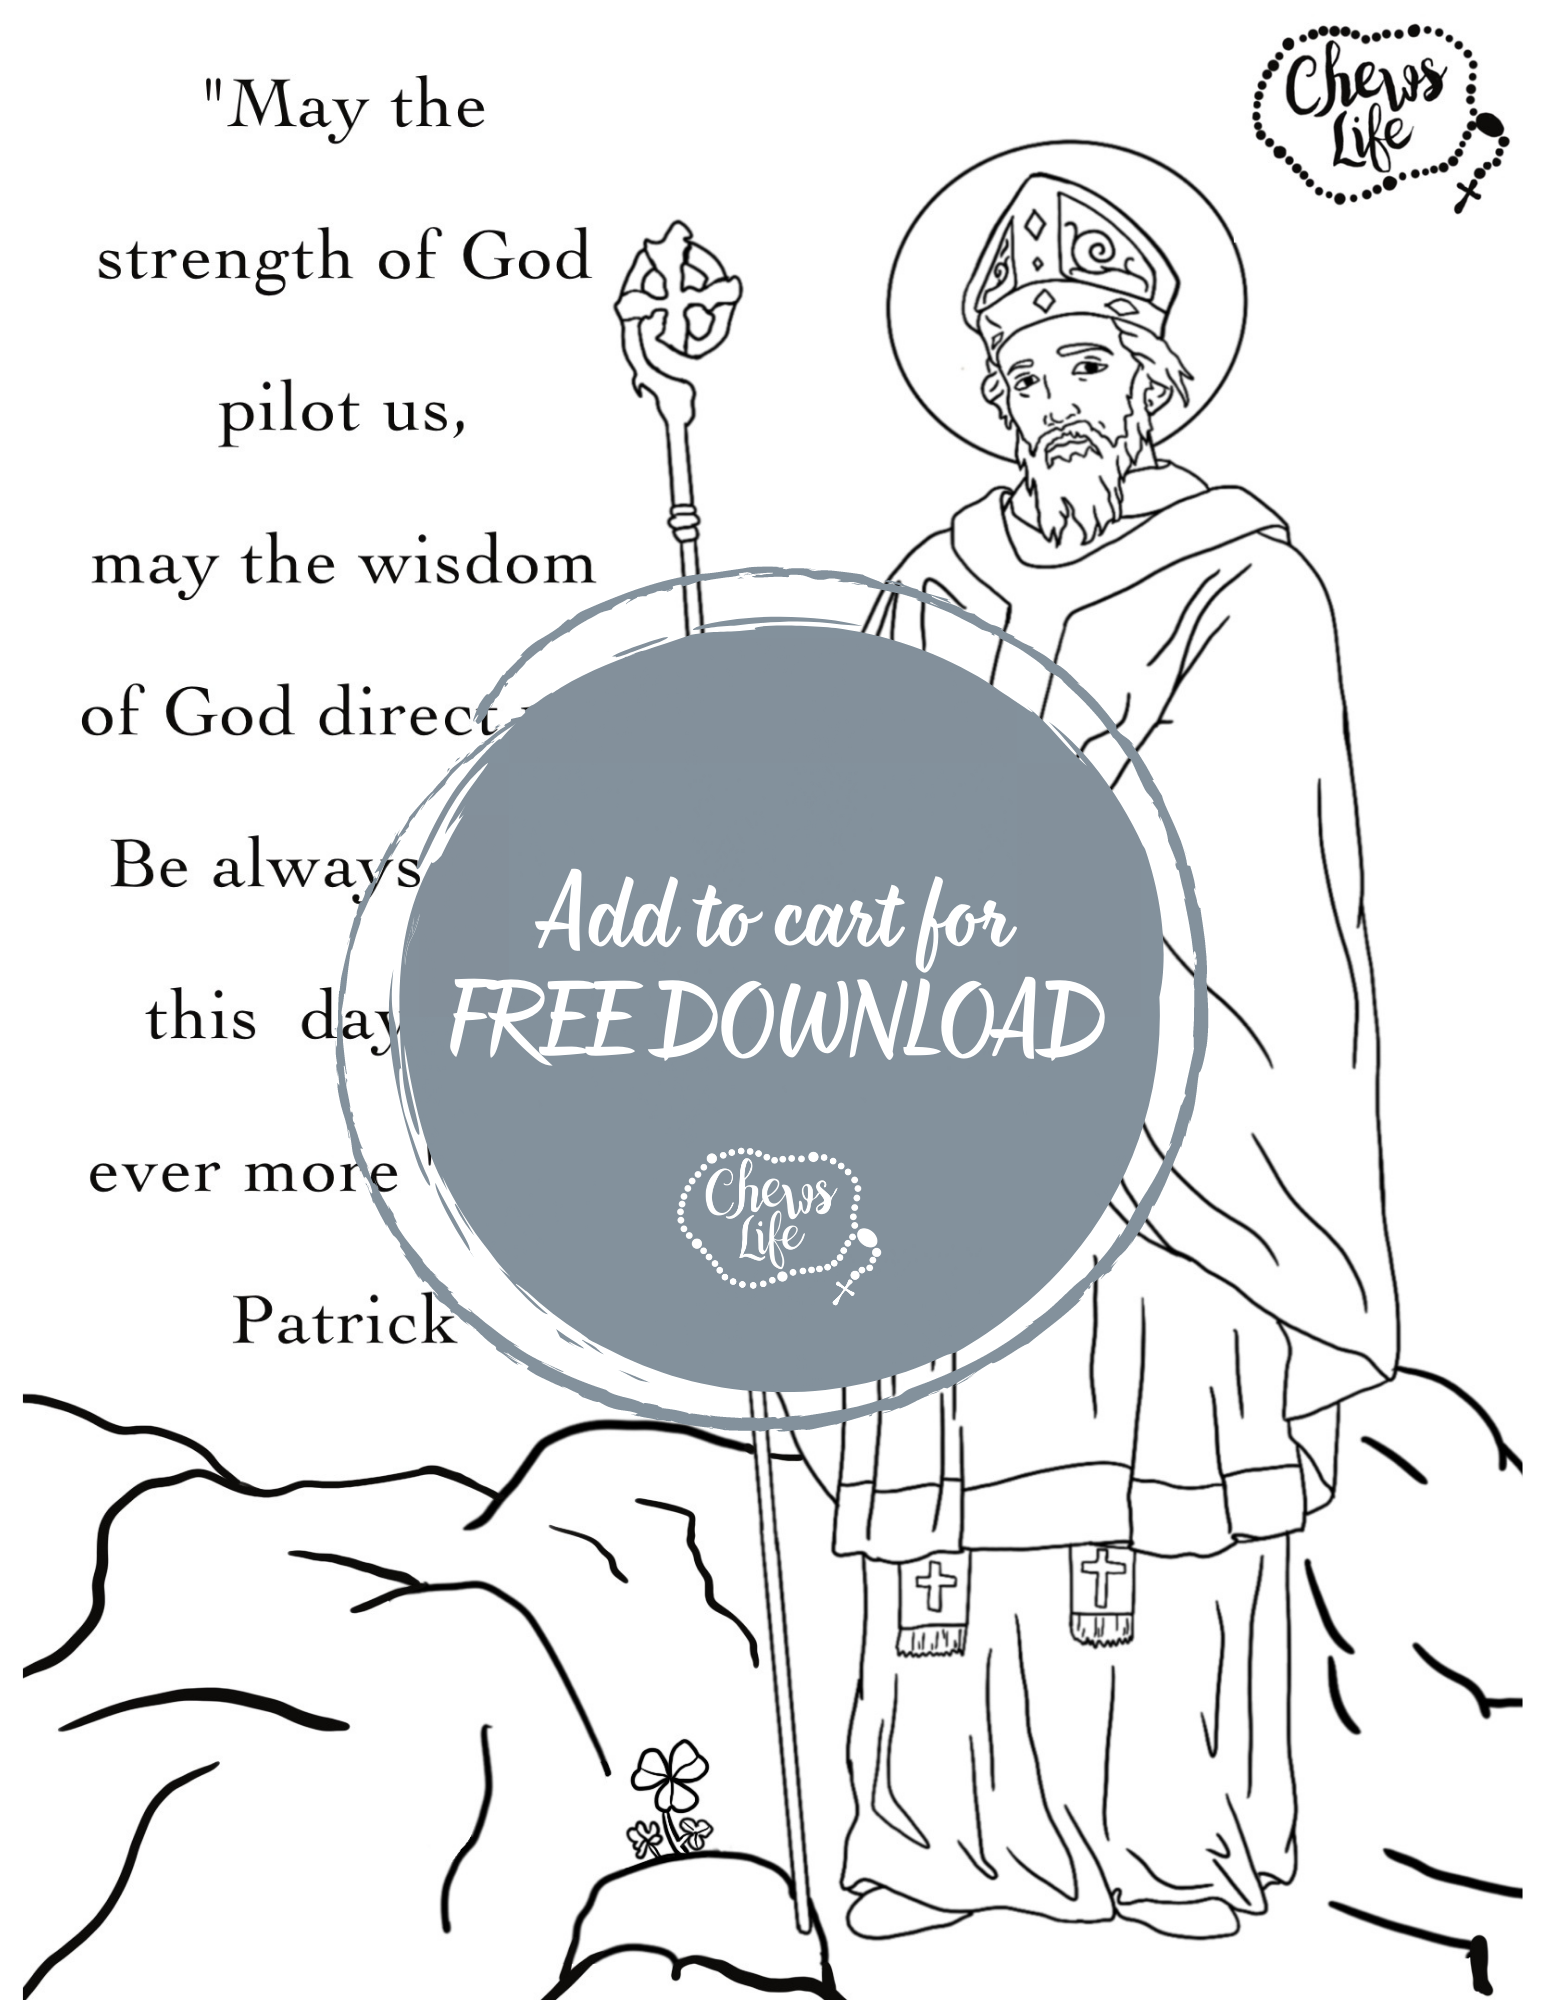 chews-life-coloring-page-st-patrick-31349598912688.png